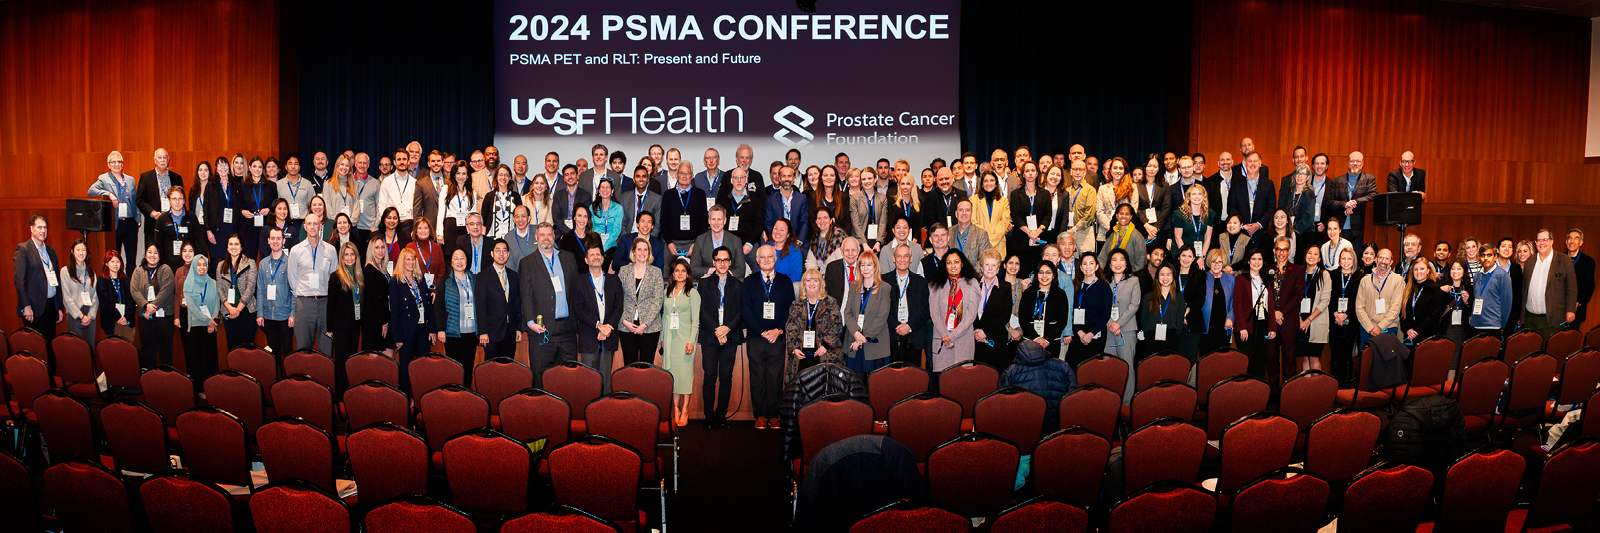 2024 PSMA Conference Audience